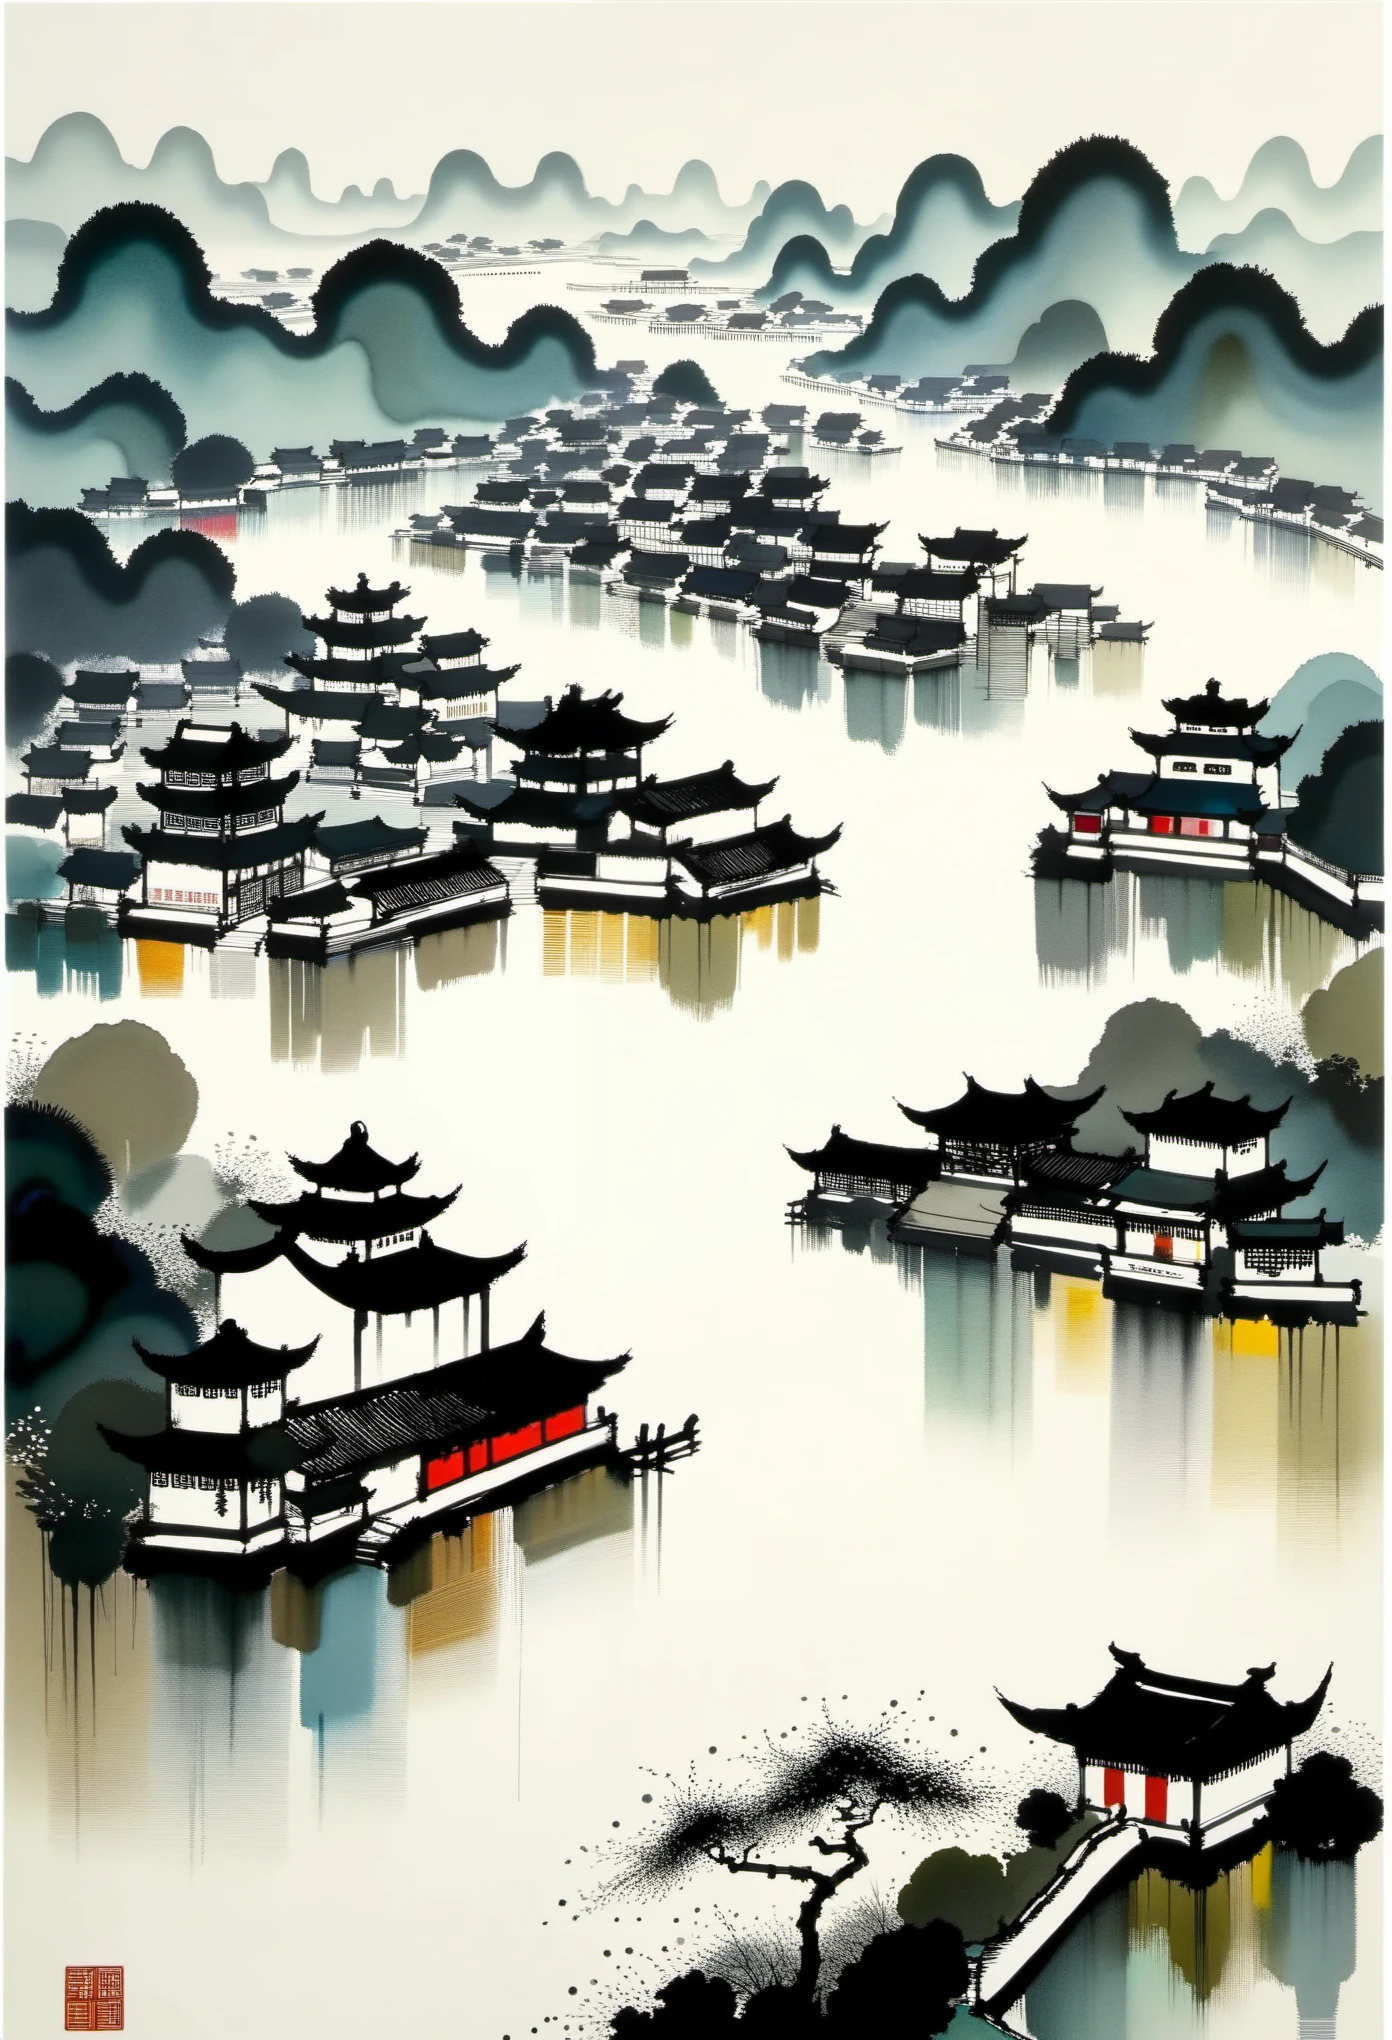 Geometric abstract ink，Describe the Jiangnan landscape architectural complex，Wu Guanzhong's style is an artistic expression that merges traditional Chinese ink techniques with Western painting concepts. It is characterized by modern interpretations of traditional themes, creating unique visual effects through color and line.